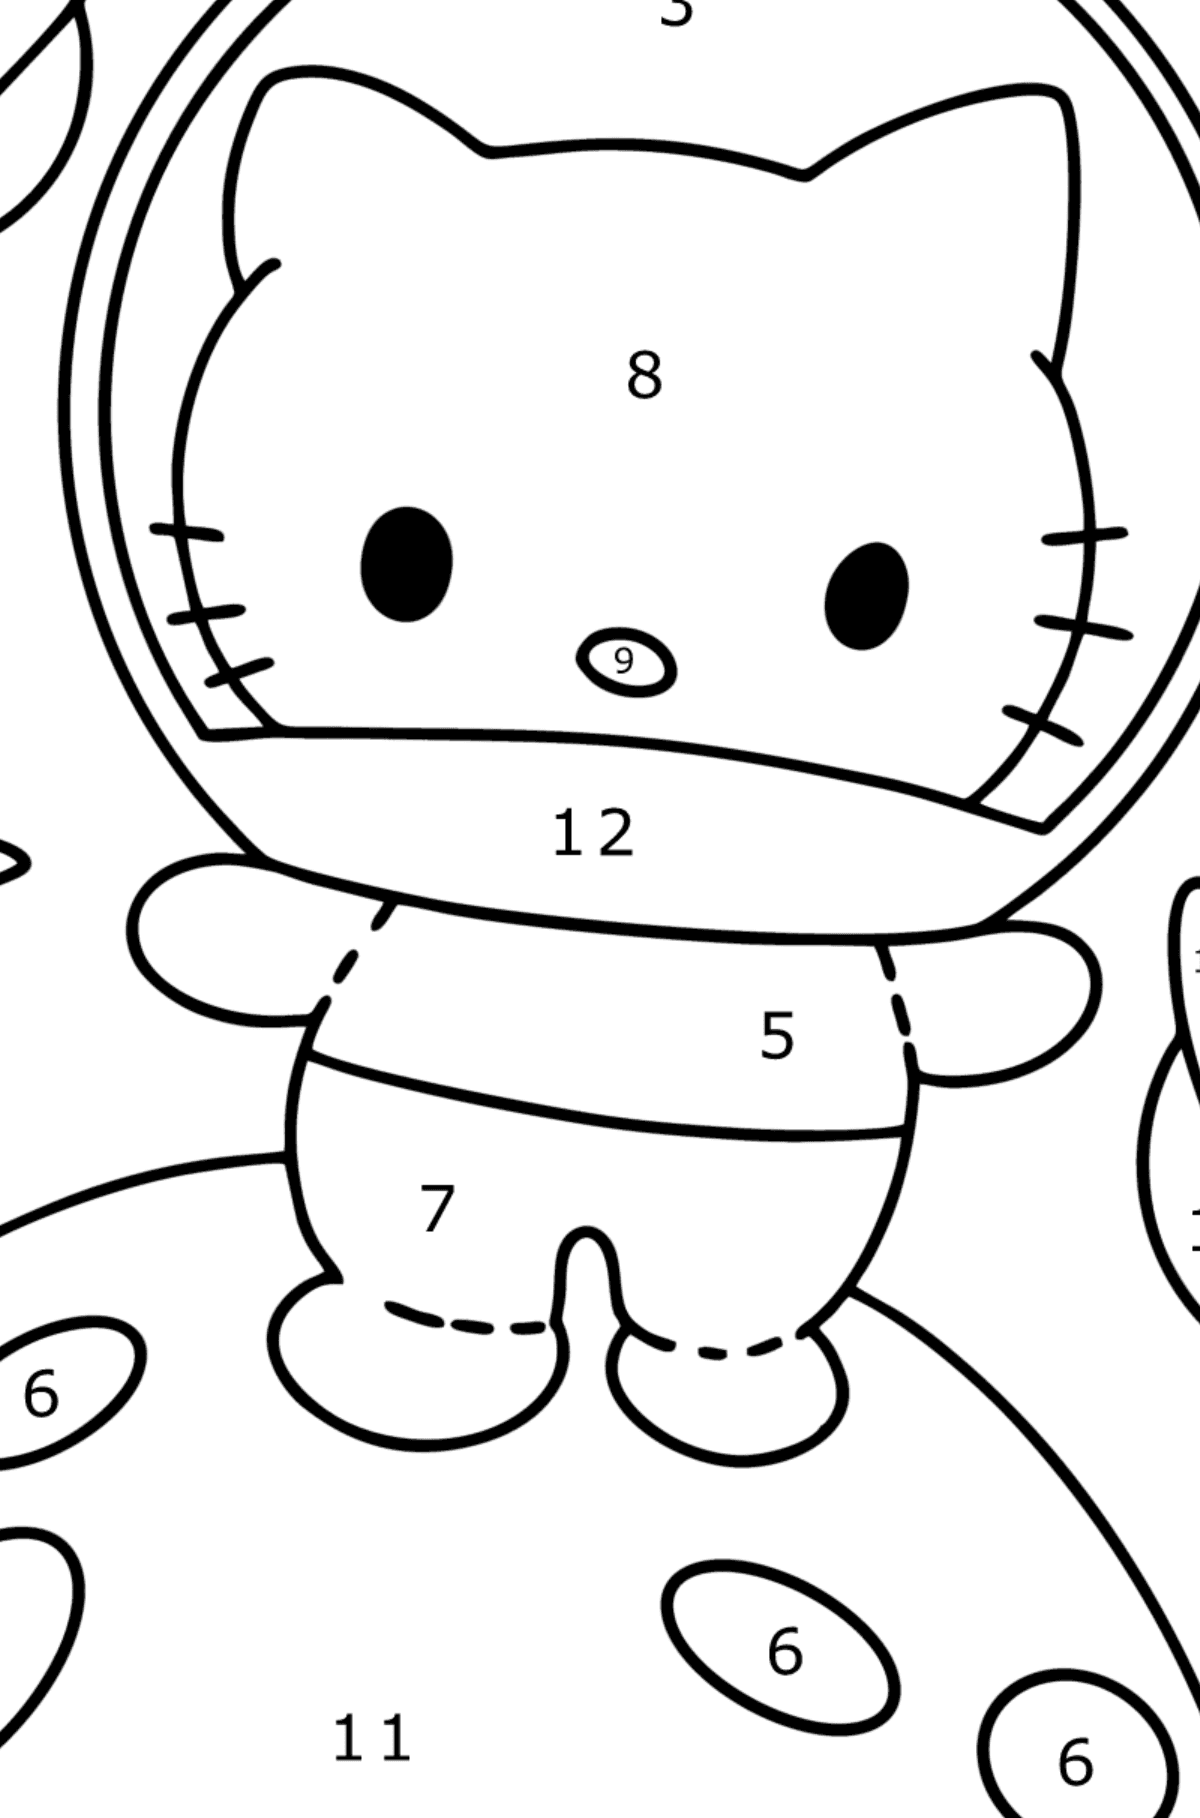 Hello Kitty Astronaut coloring page - Coloring by Numbers for Kids